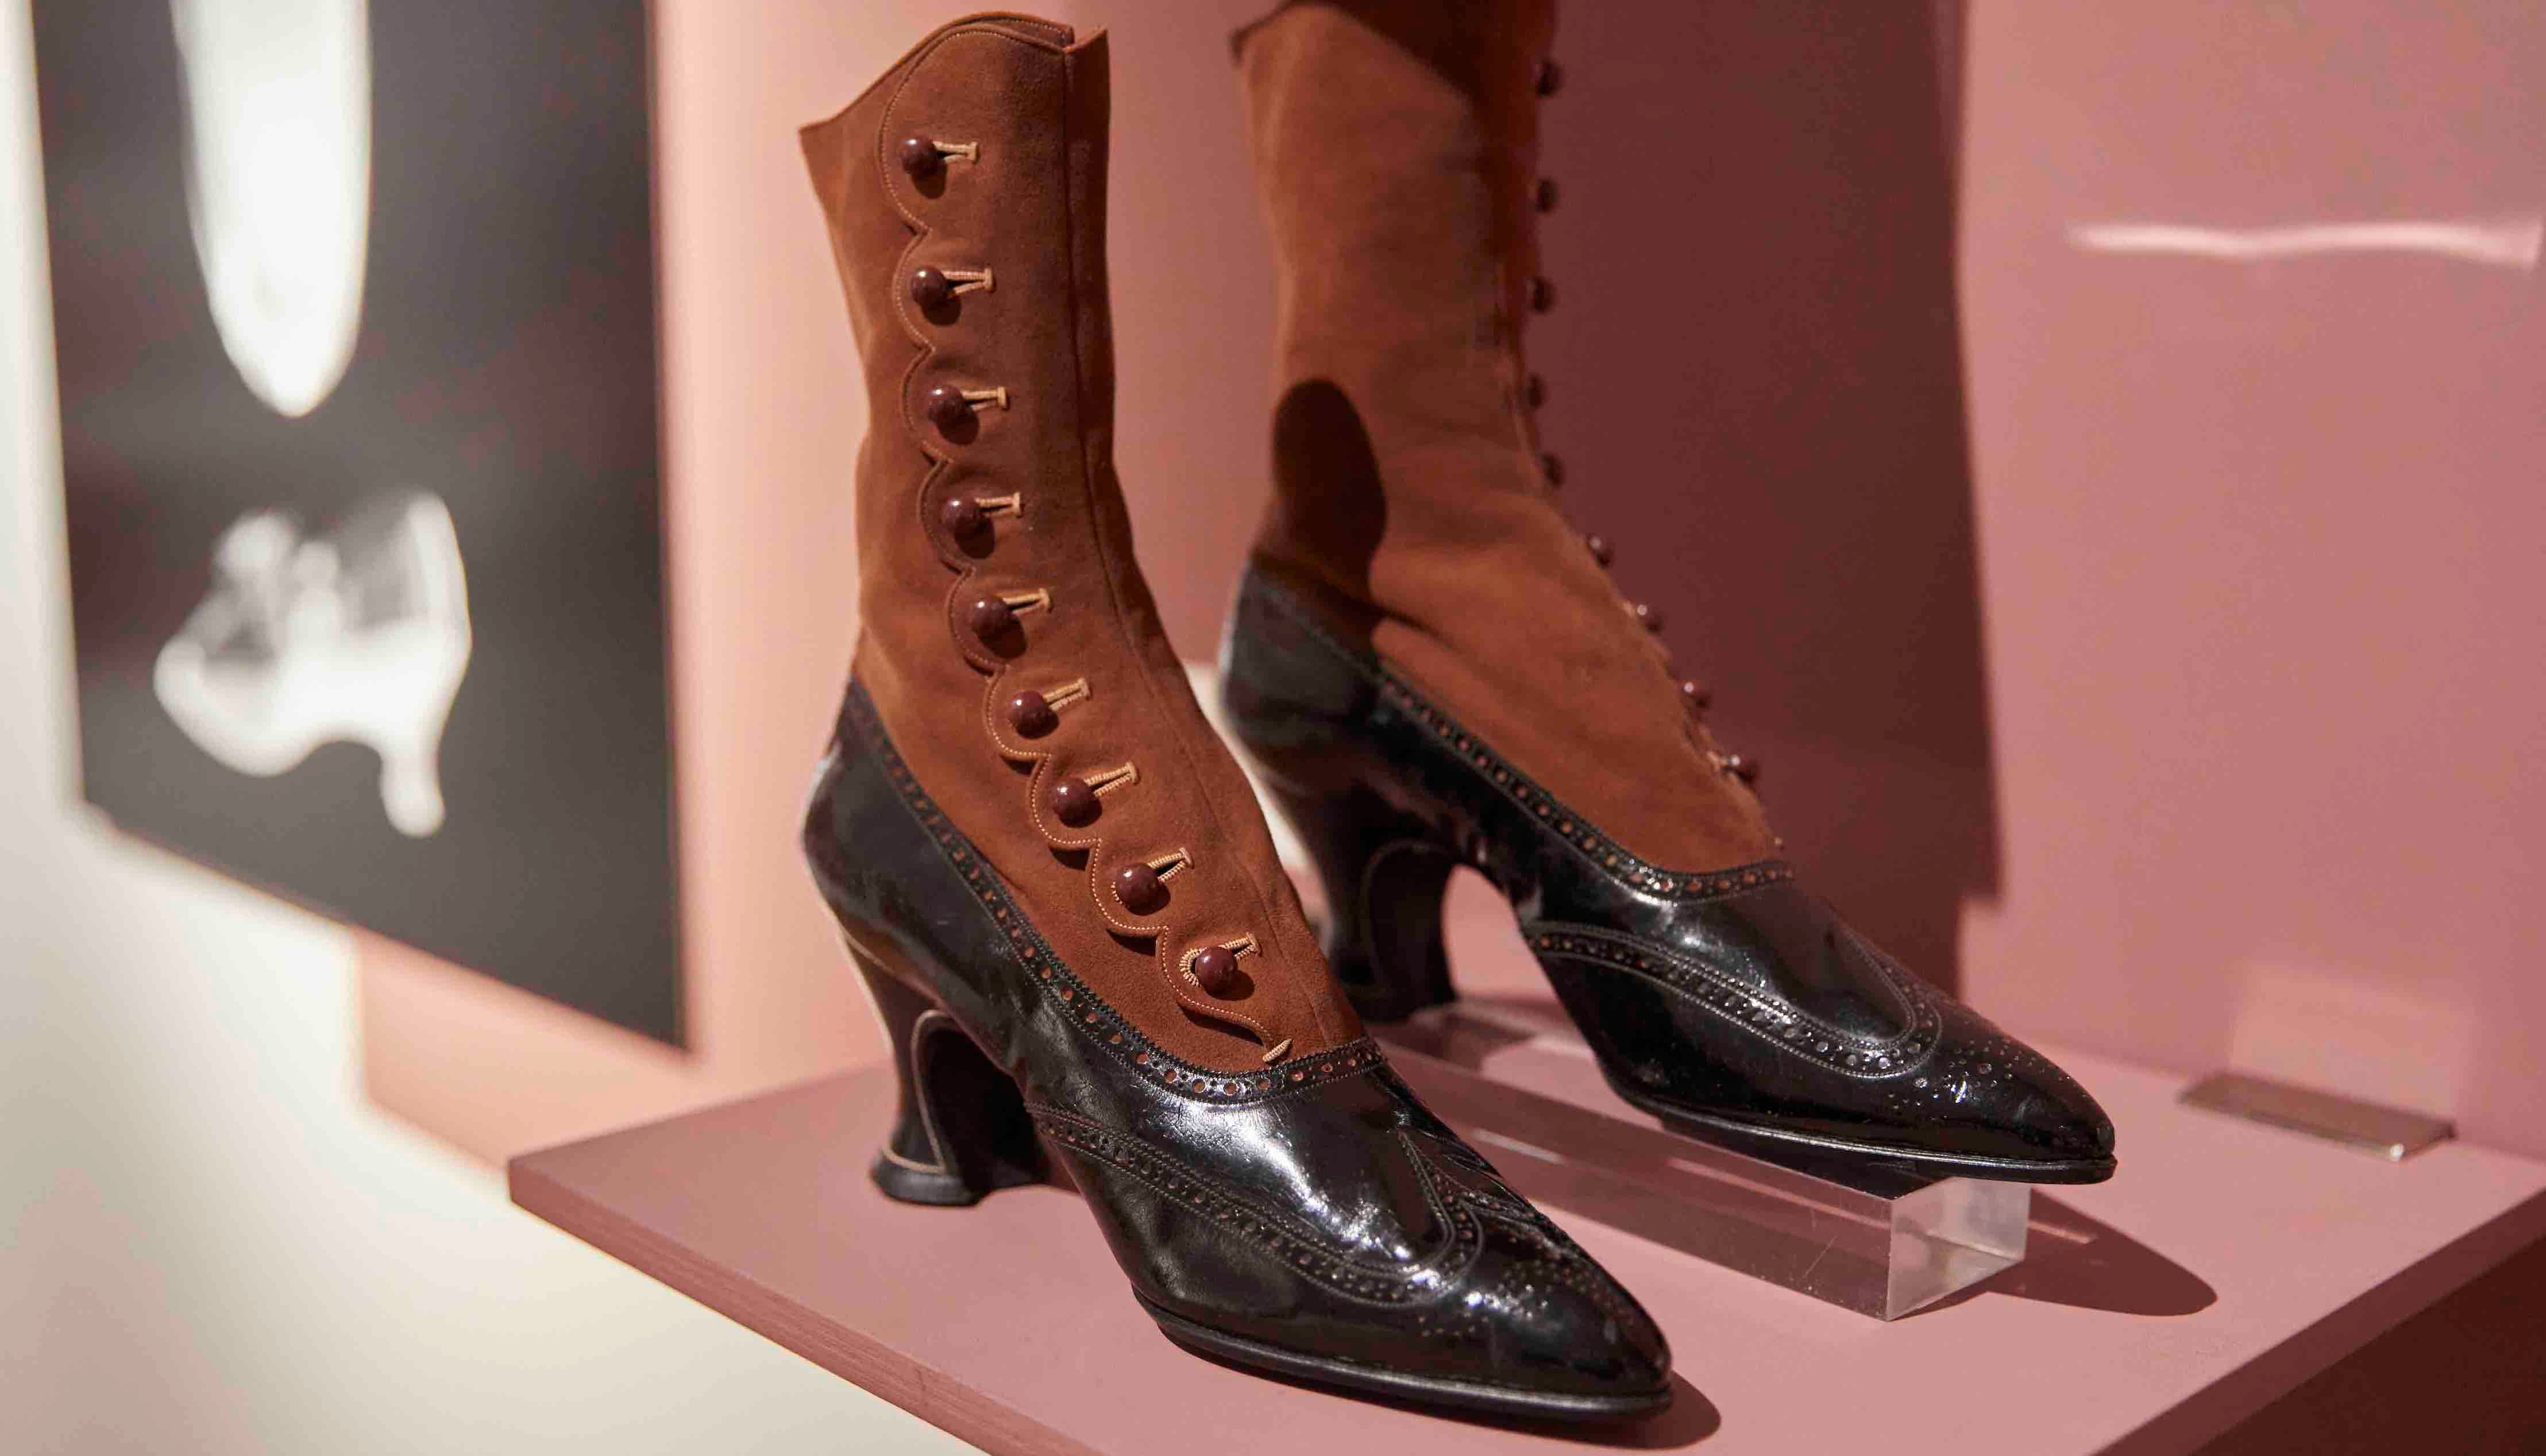 Women's Boots - Made in Australia Since 1910